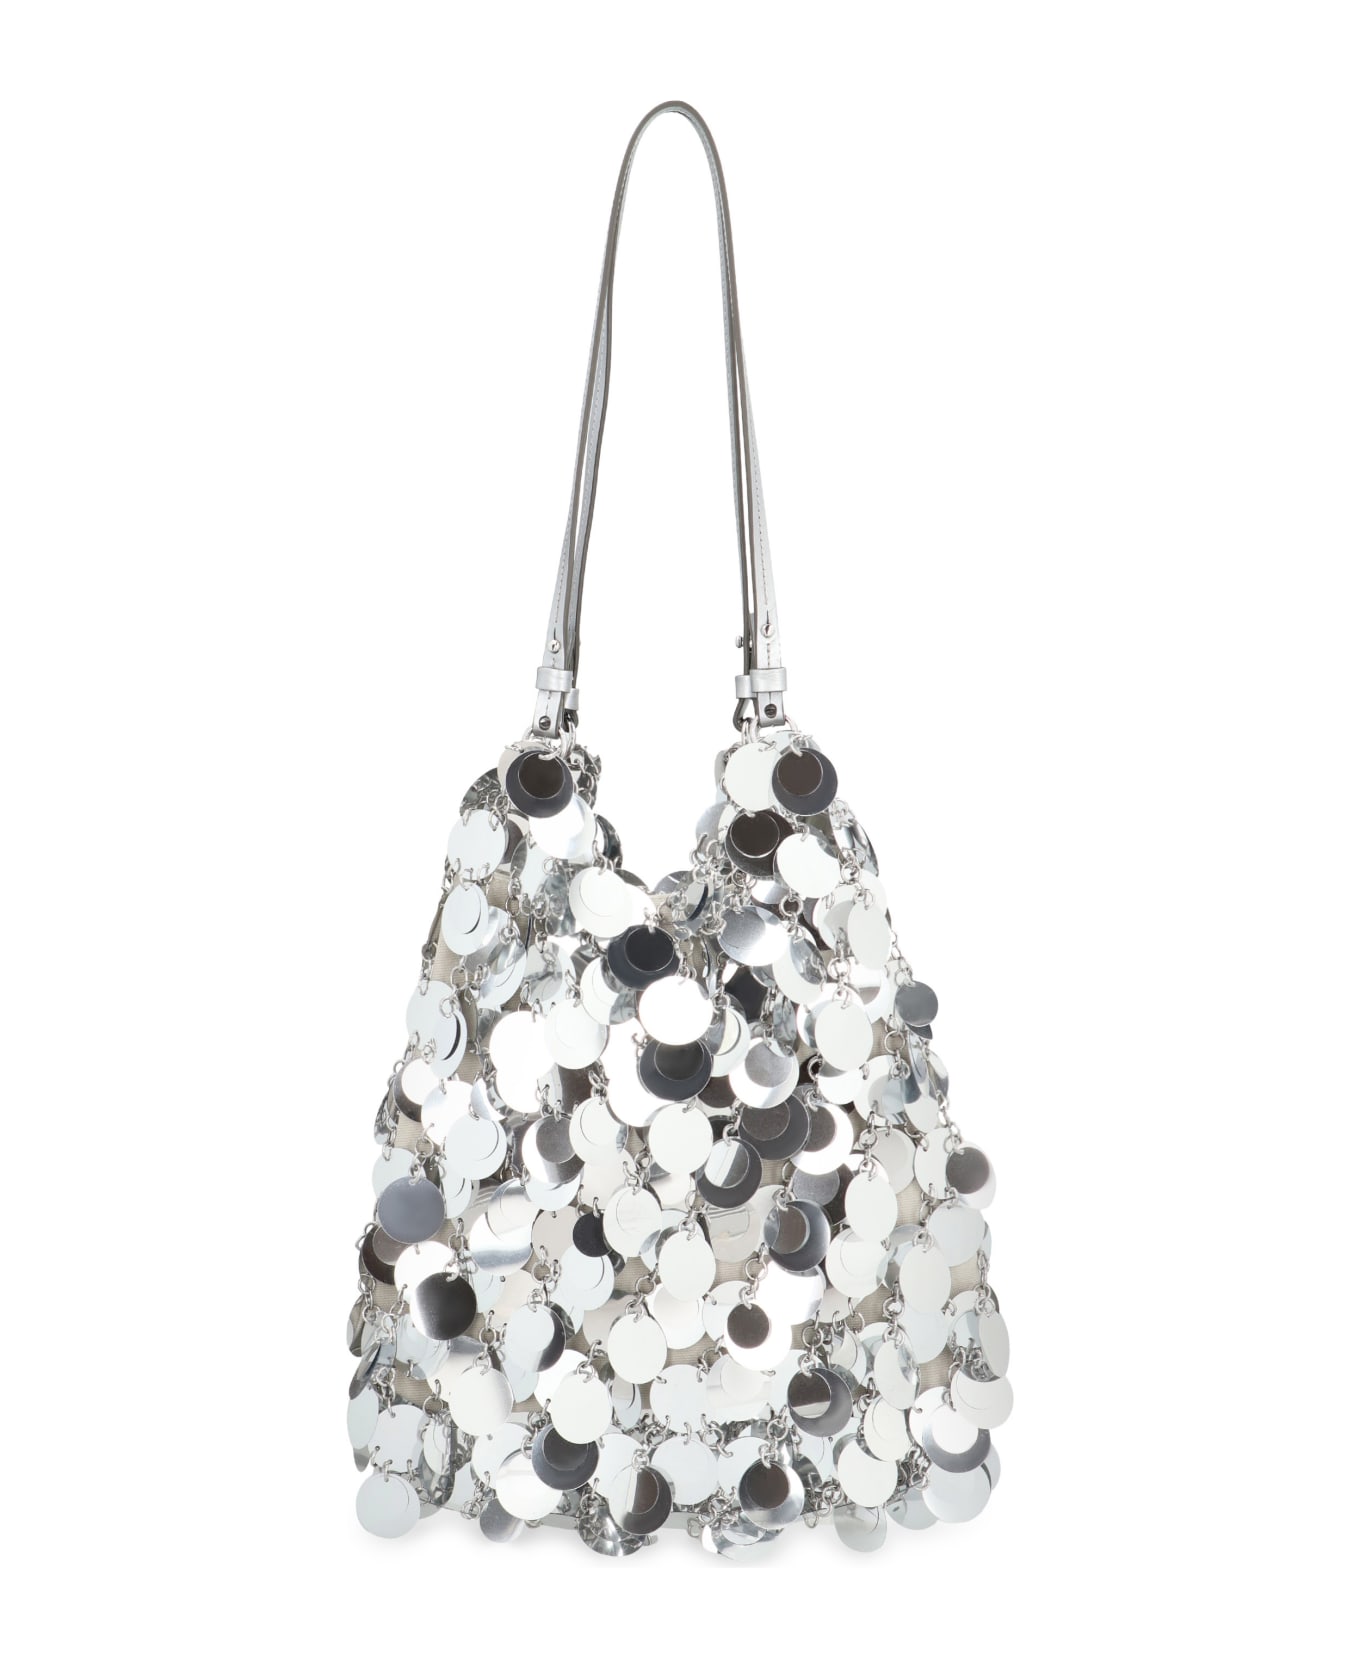 Paco Rabanne Sparkles Tote Bag - Silver トートバッグ